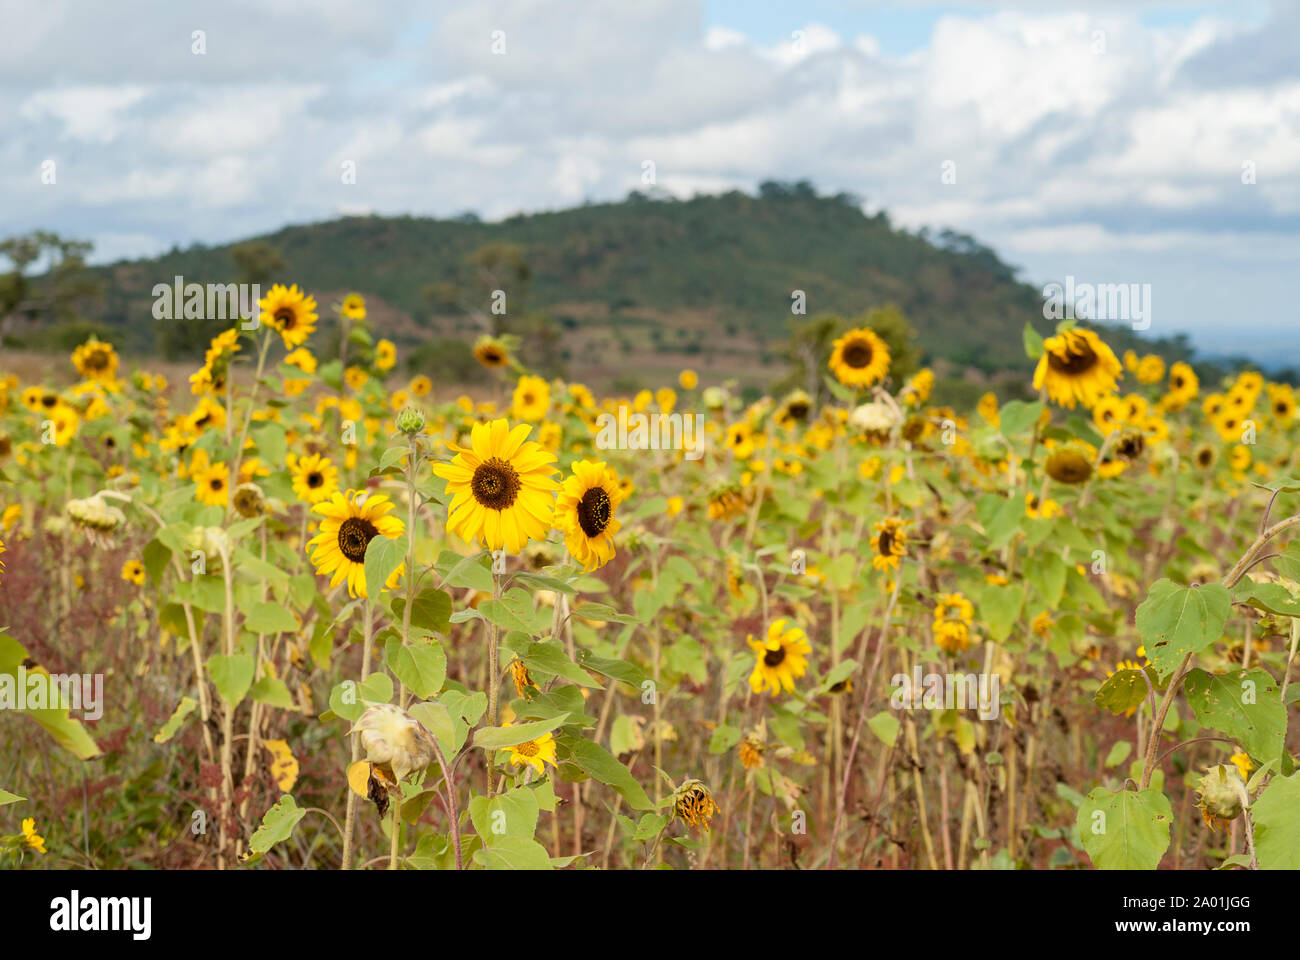 Field of cultivated sunflowers in Malawi Stock Photo